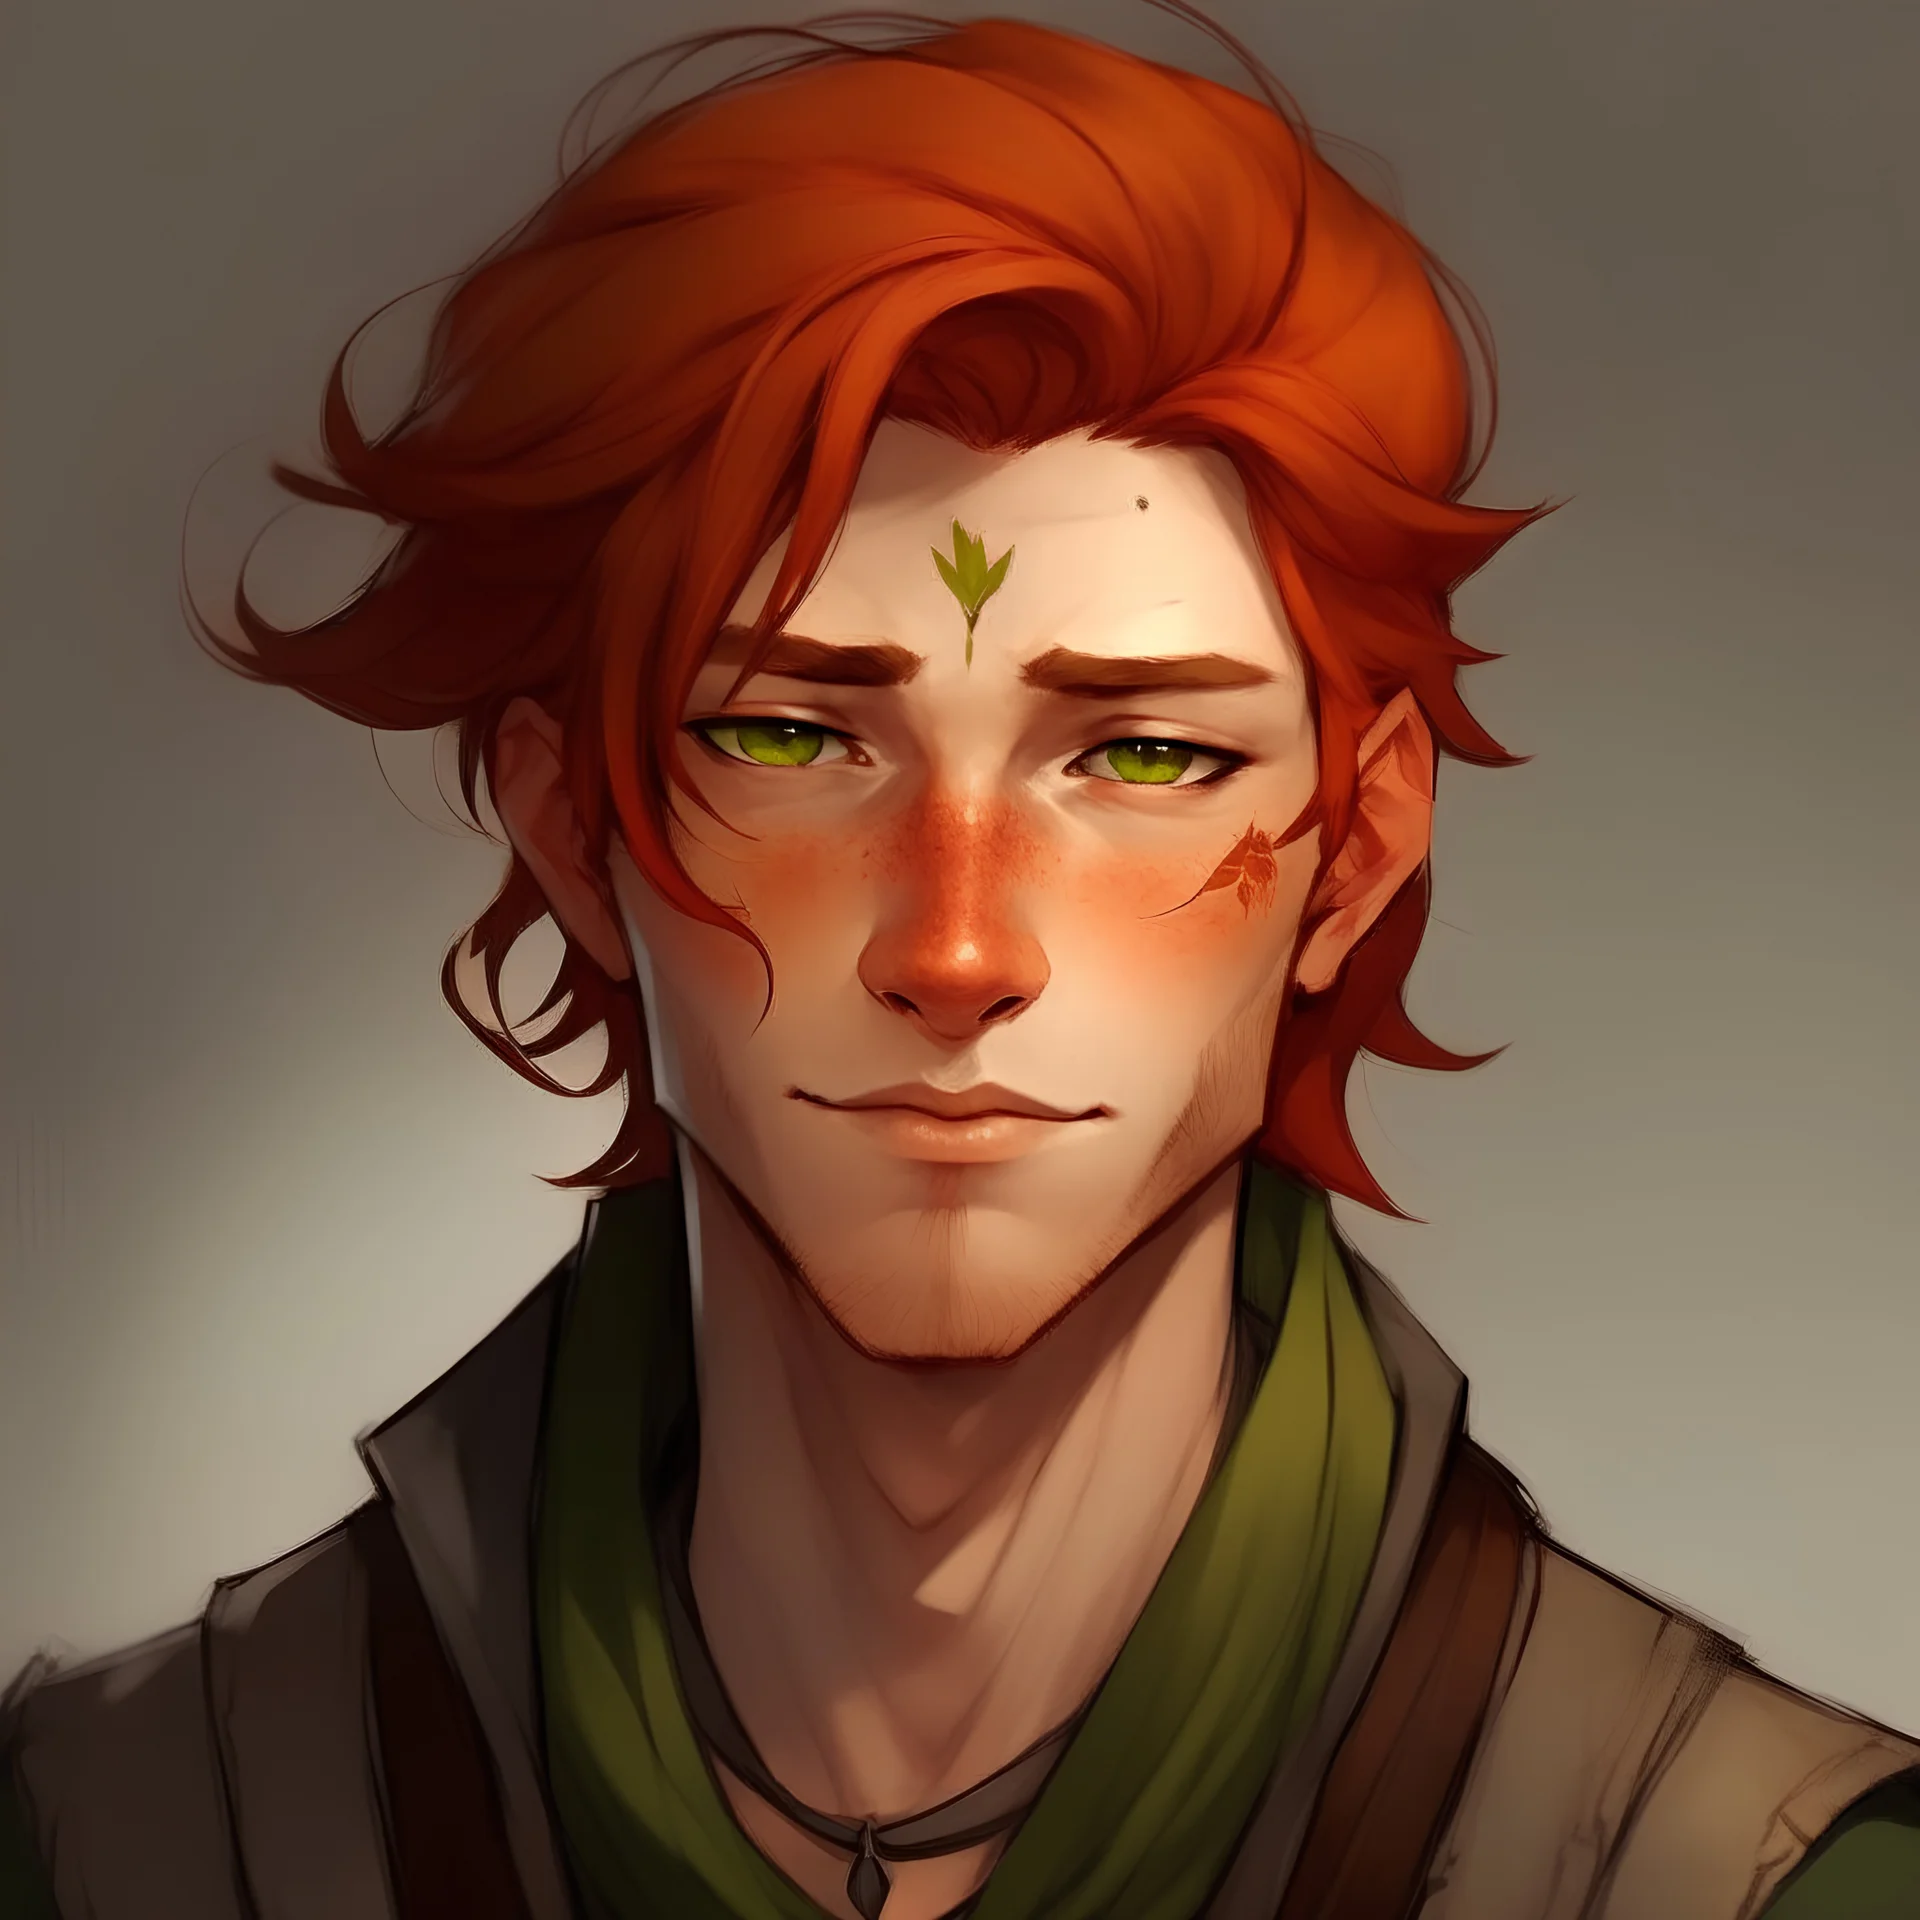 A guy named soren who is homo and has red hair